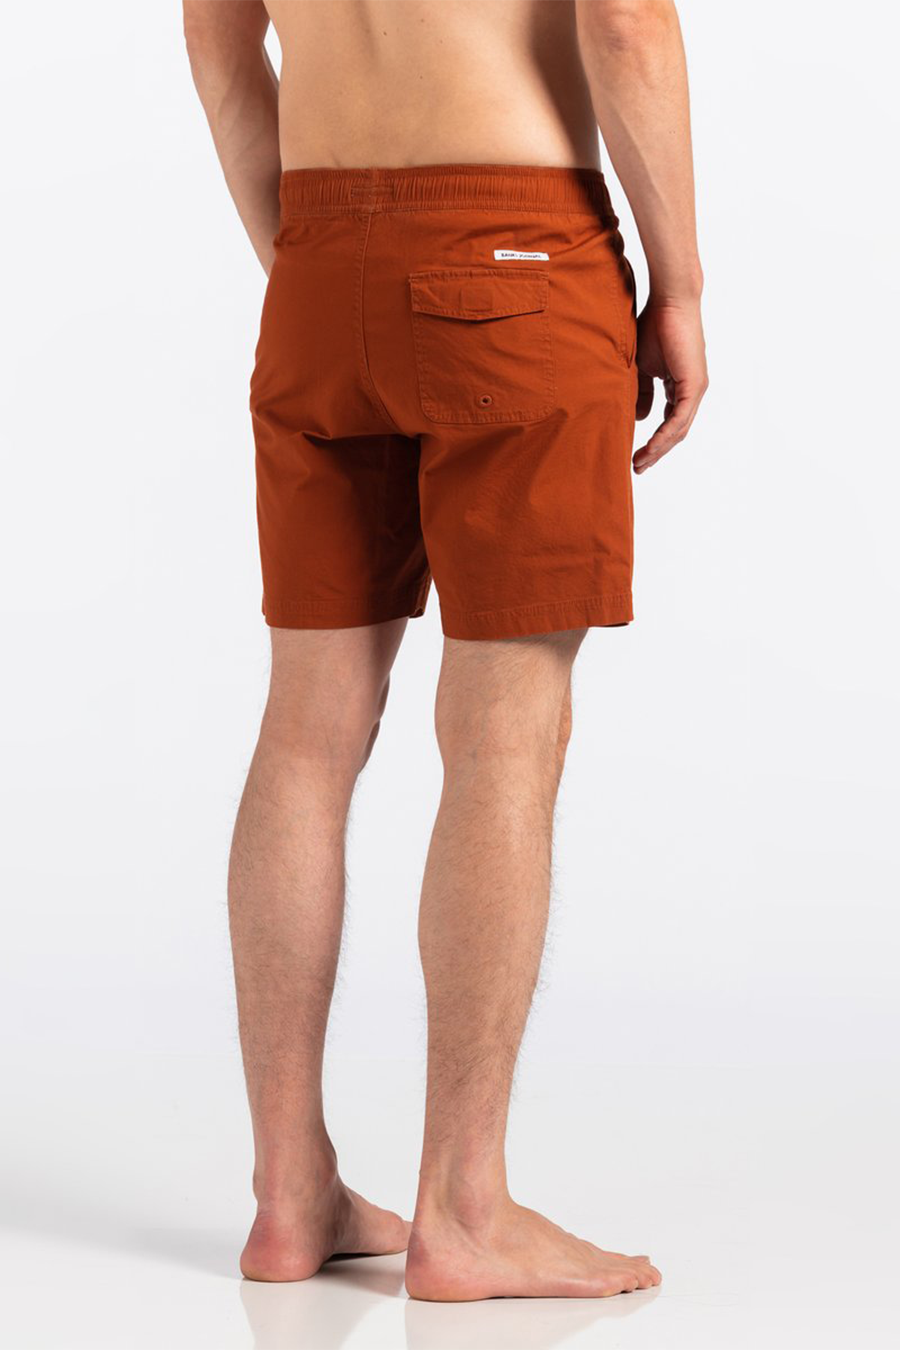 Label Elastic Boardshort | Baked Clay - Main Image Number 3 of 3